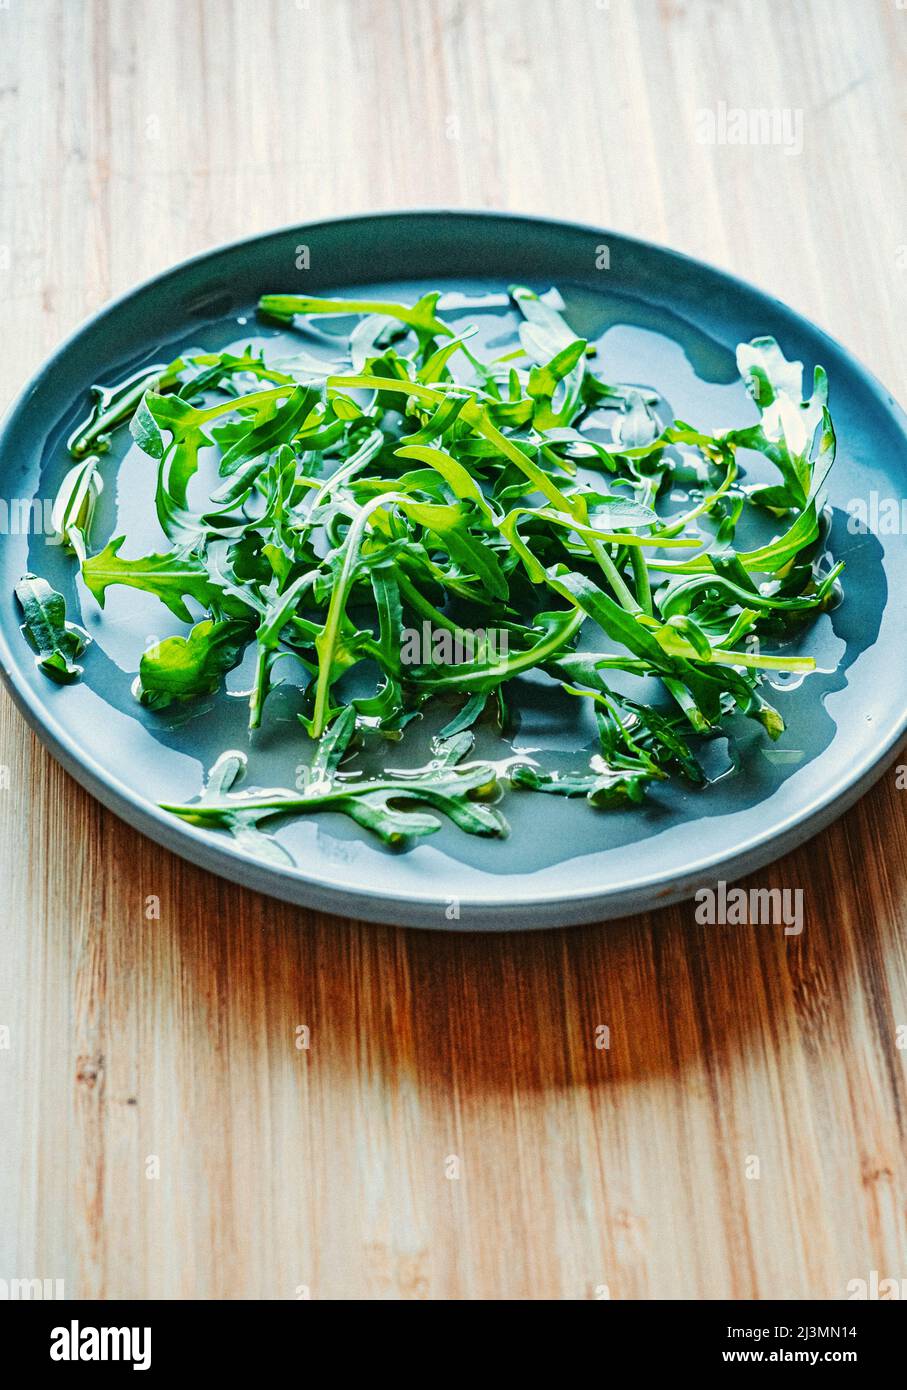 Rocket Salad Leaves, also called Aragula, Roquette and Rucola Salad Stock Photo